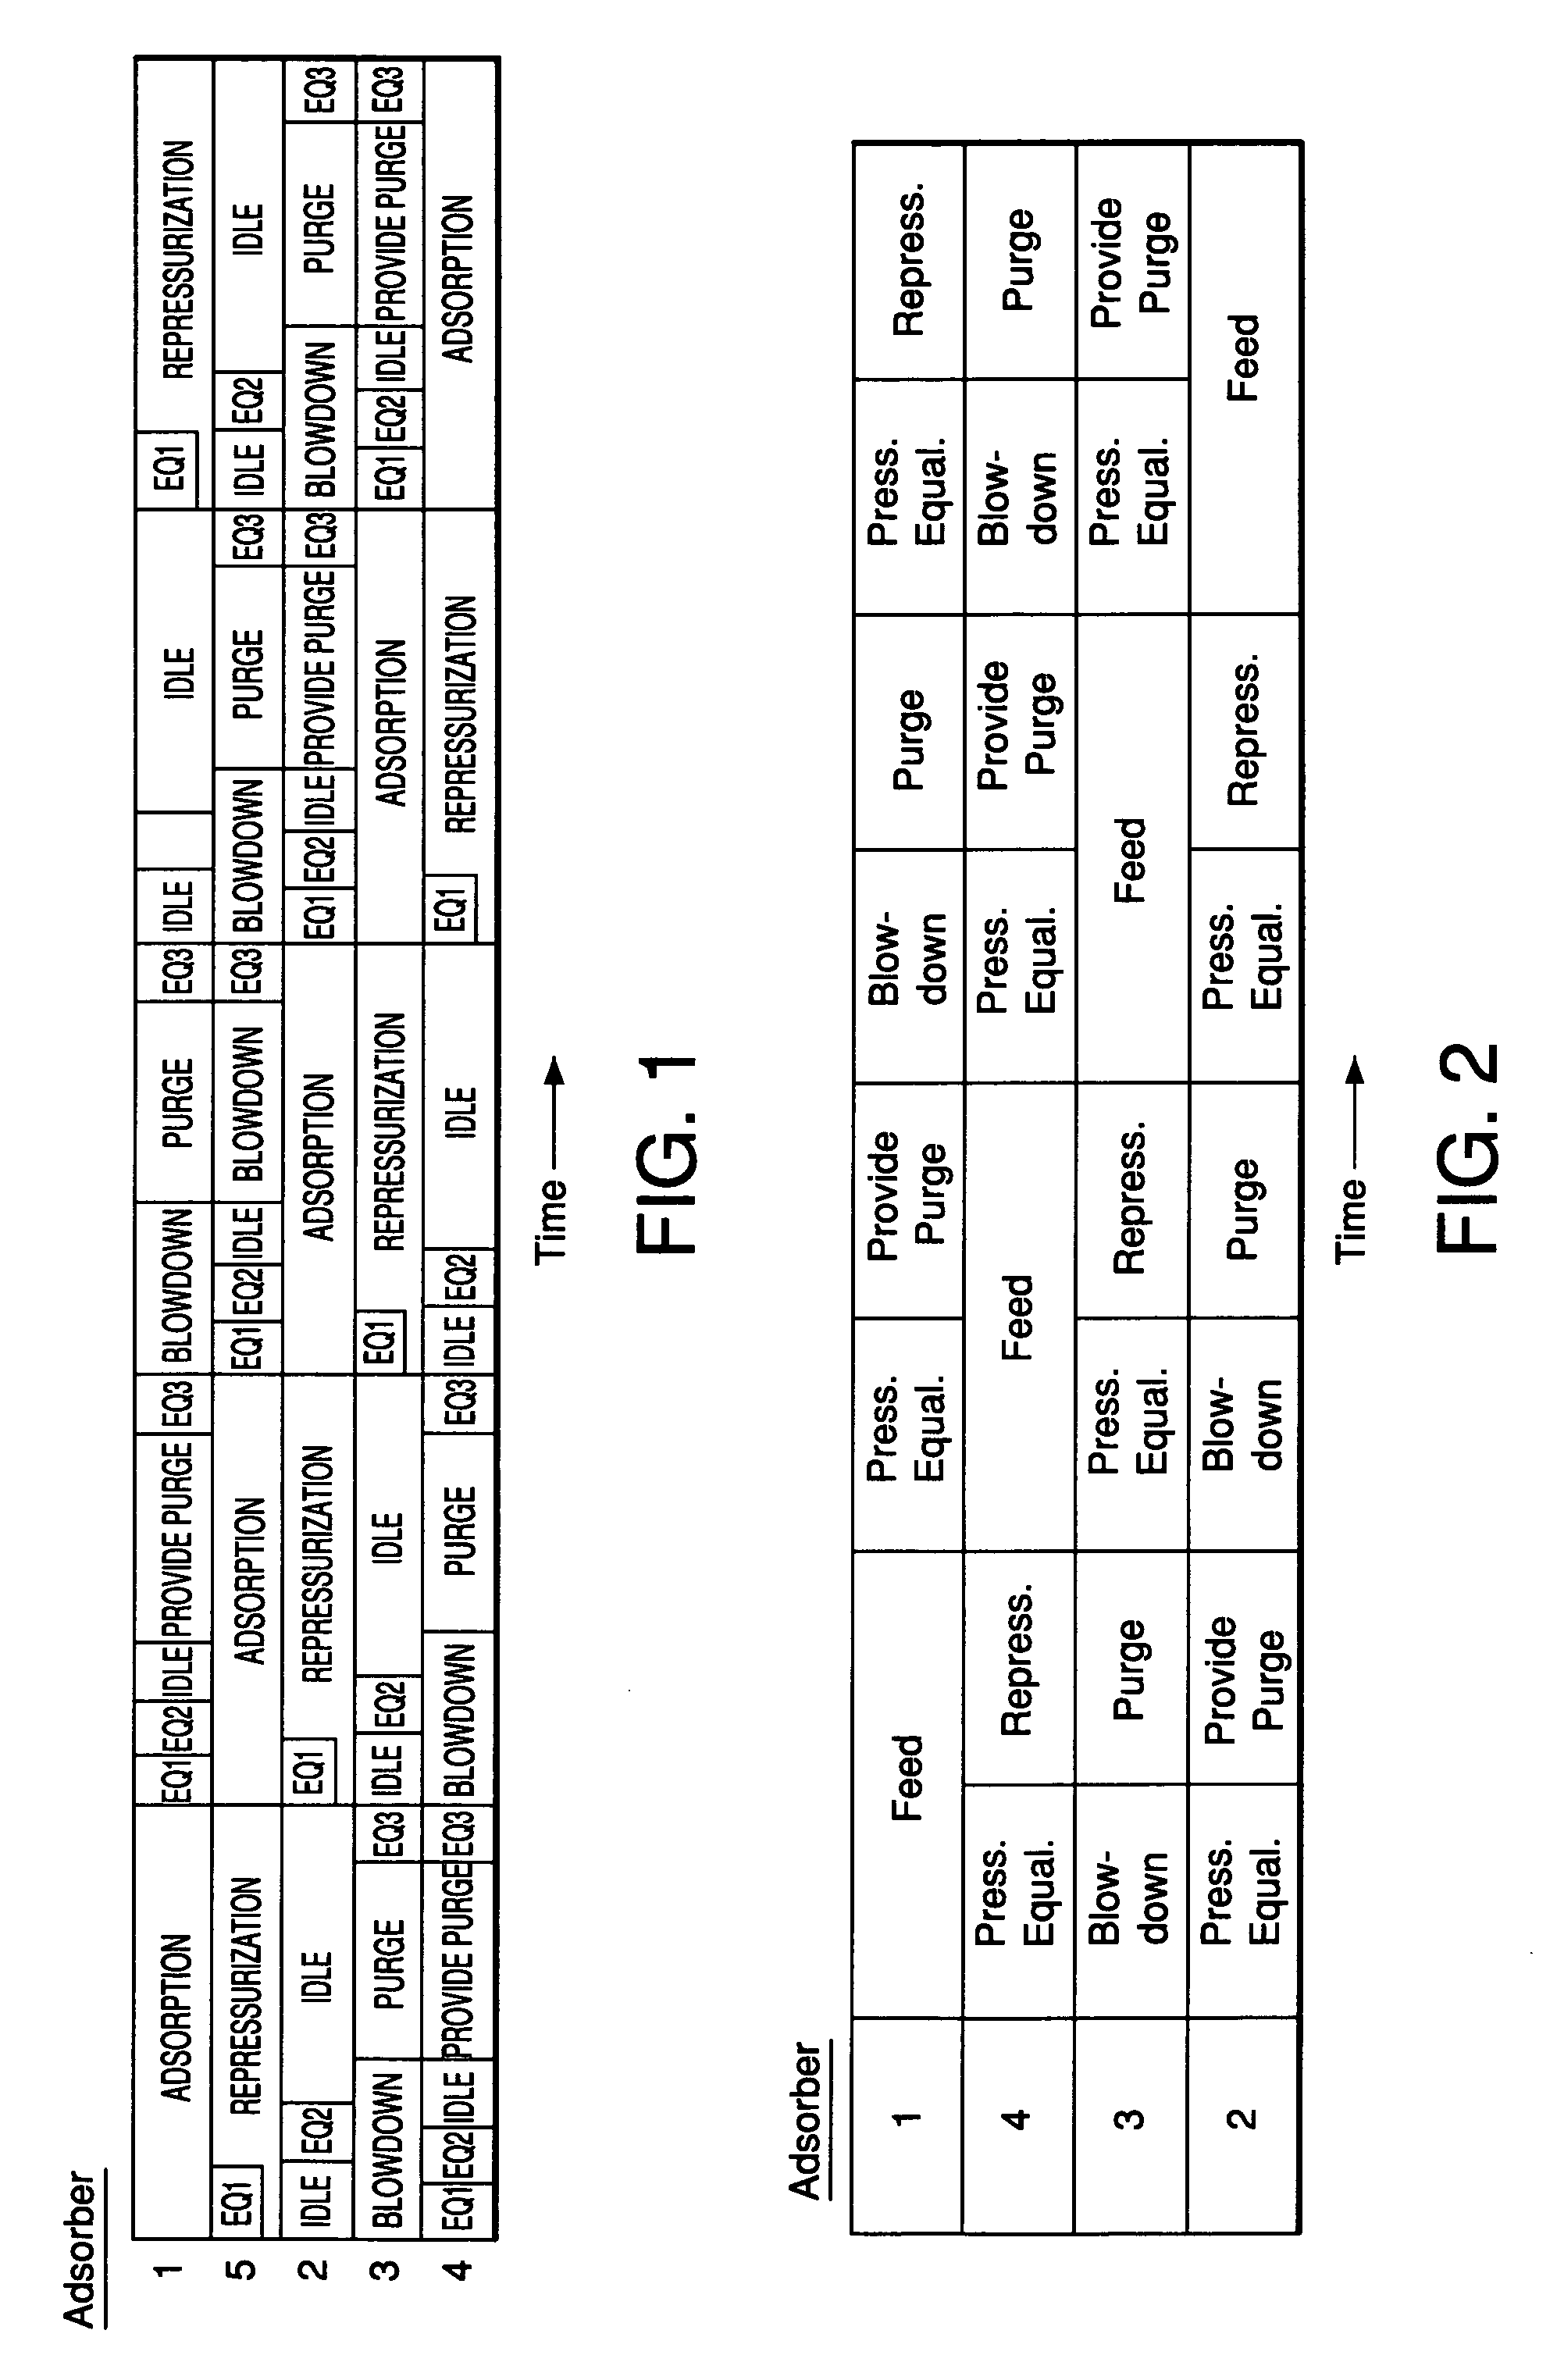 Adsorbents for rapid cycle pressure swing adsorption processes